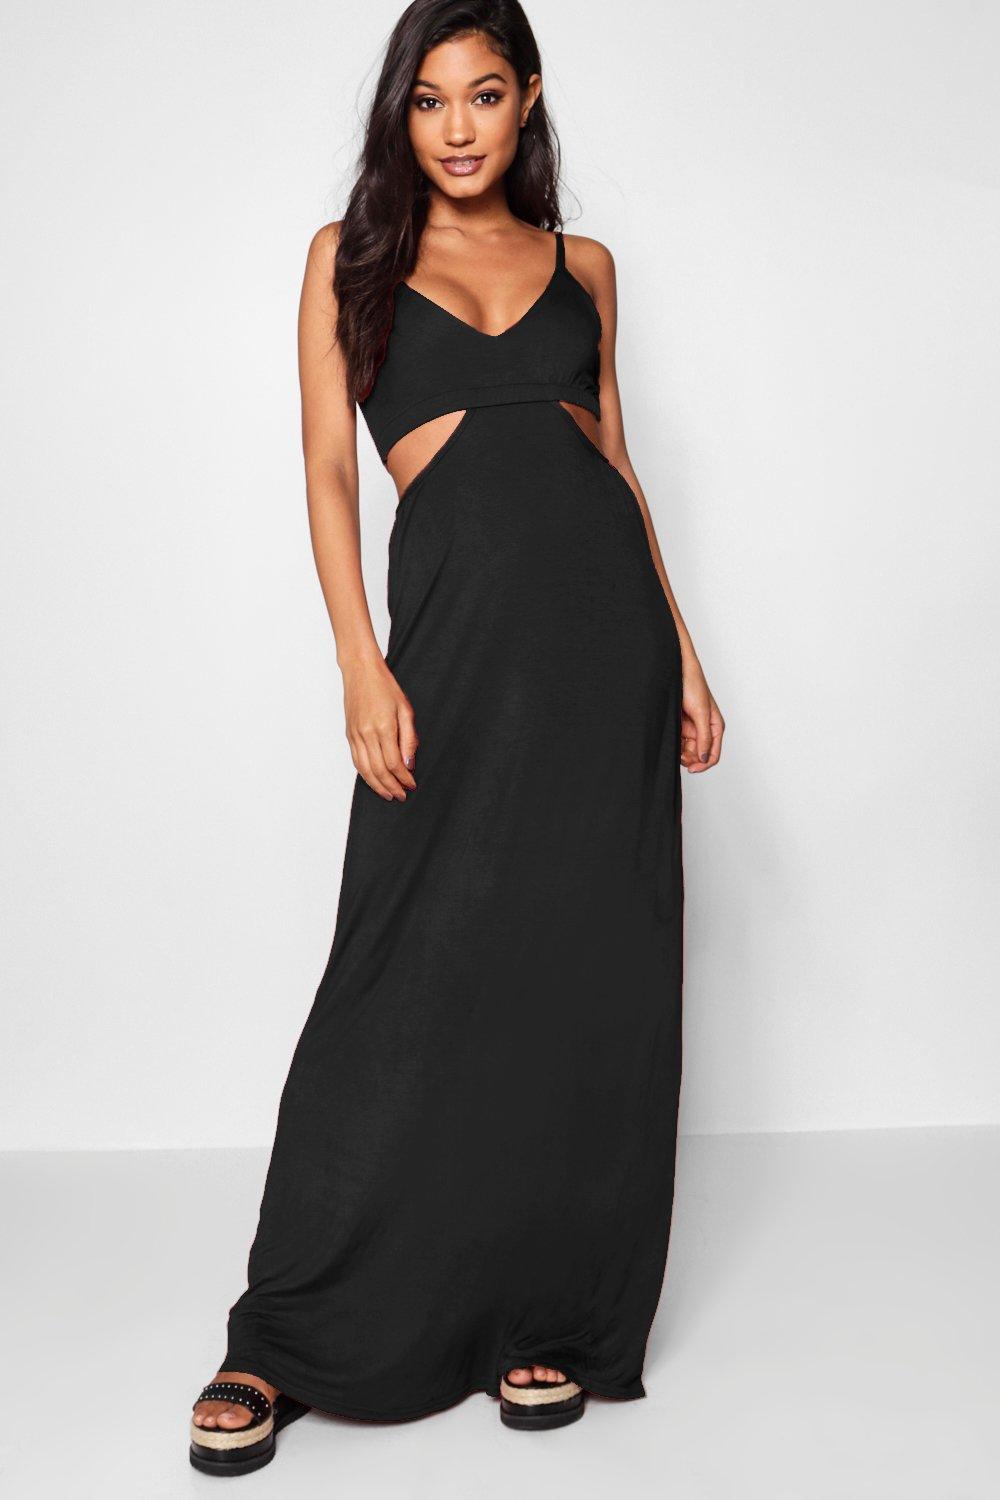 Milly Cut Out Strappy Maxi Dress at boohoo.com